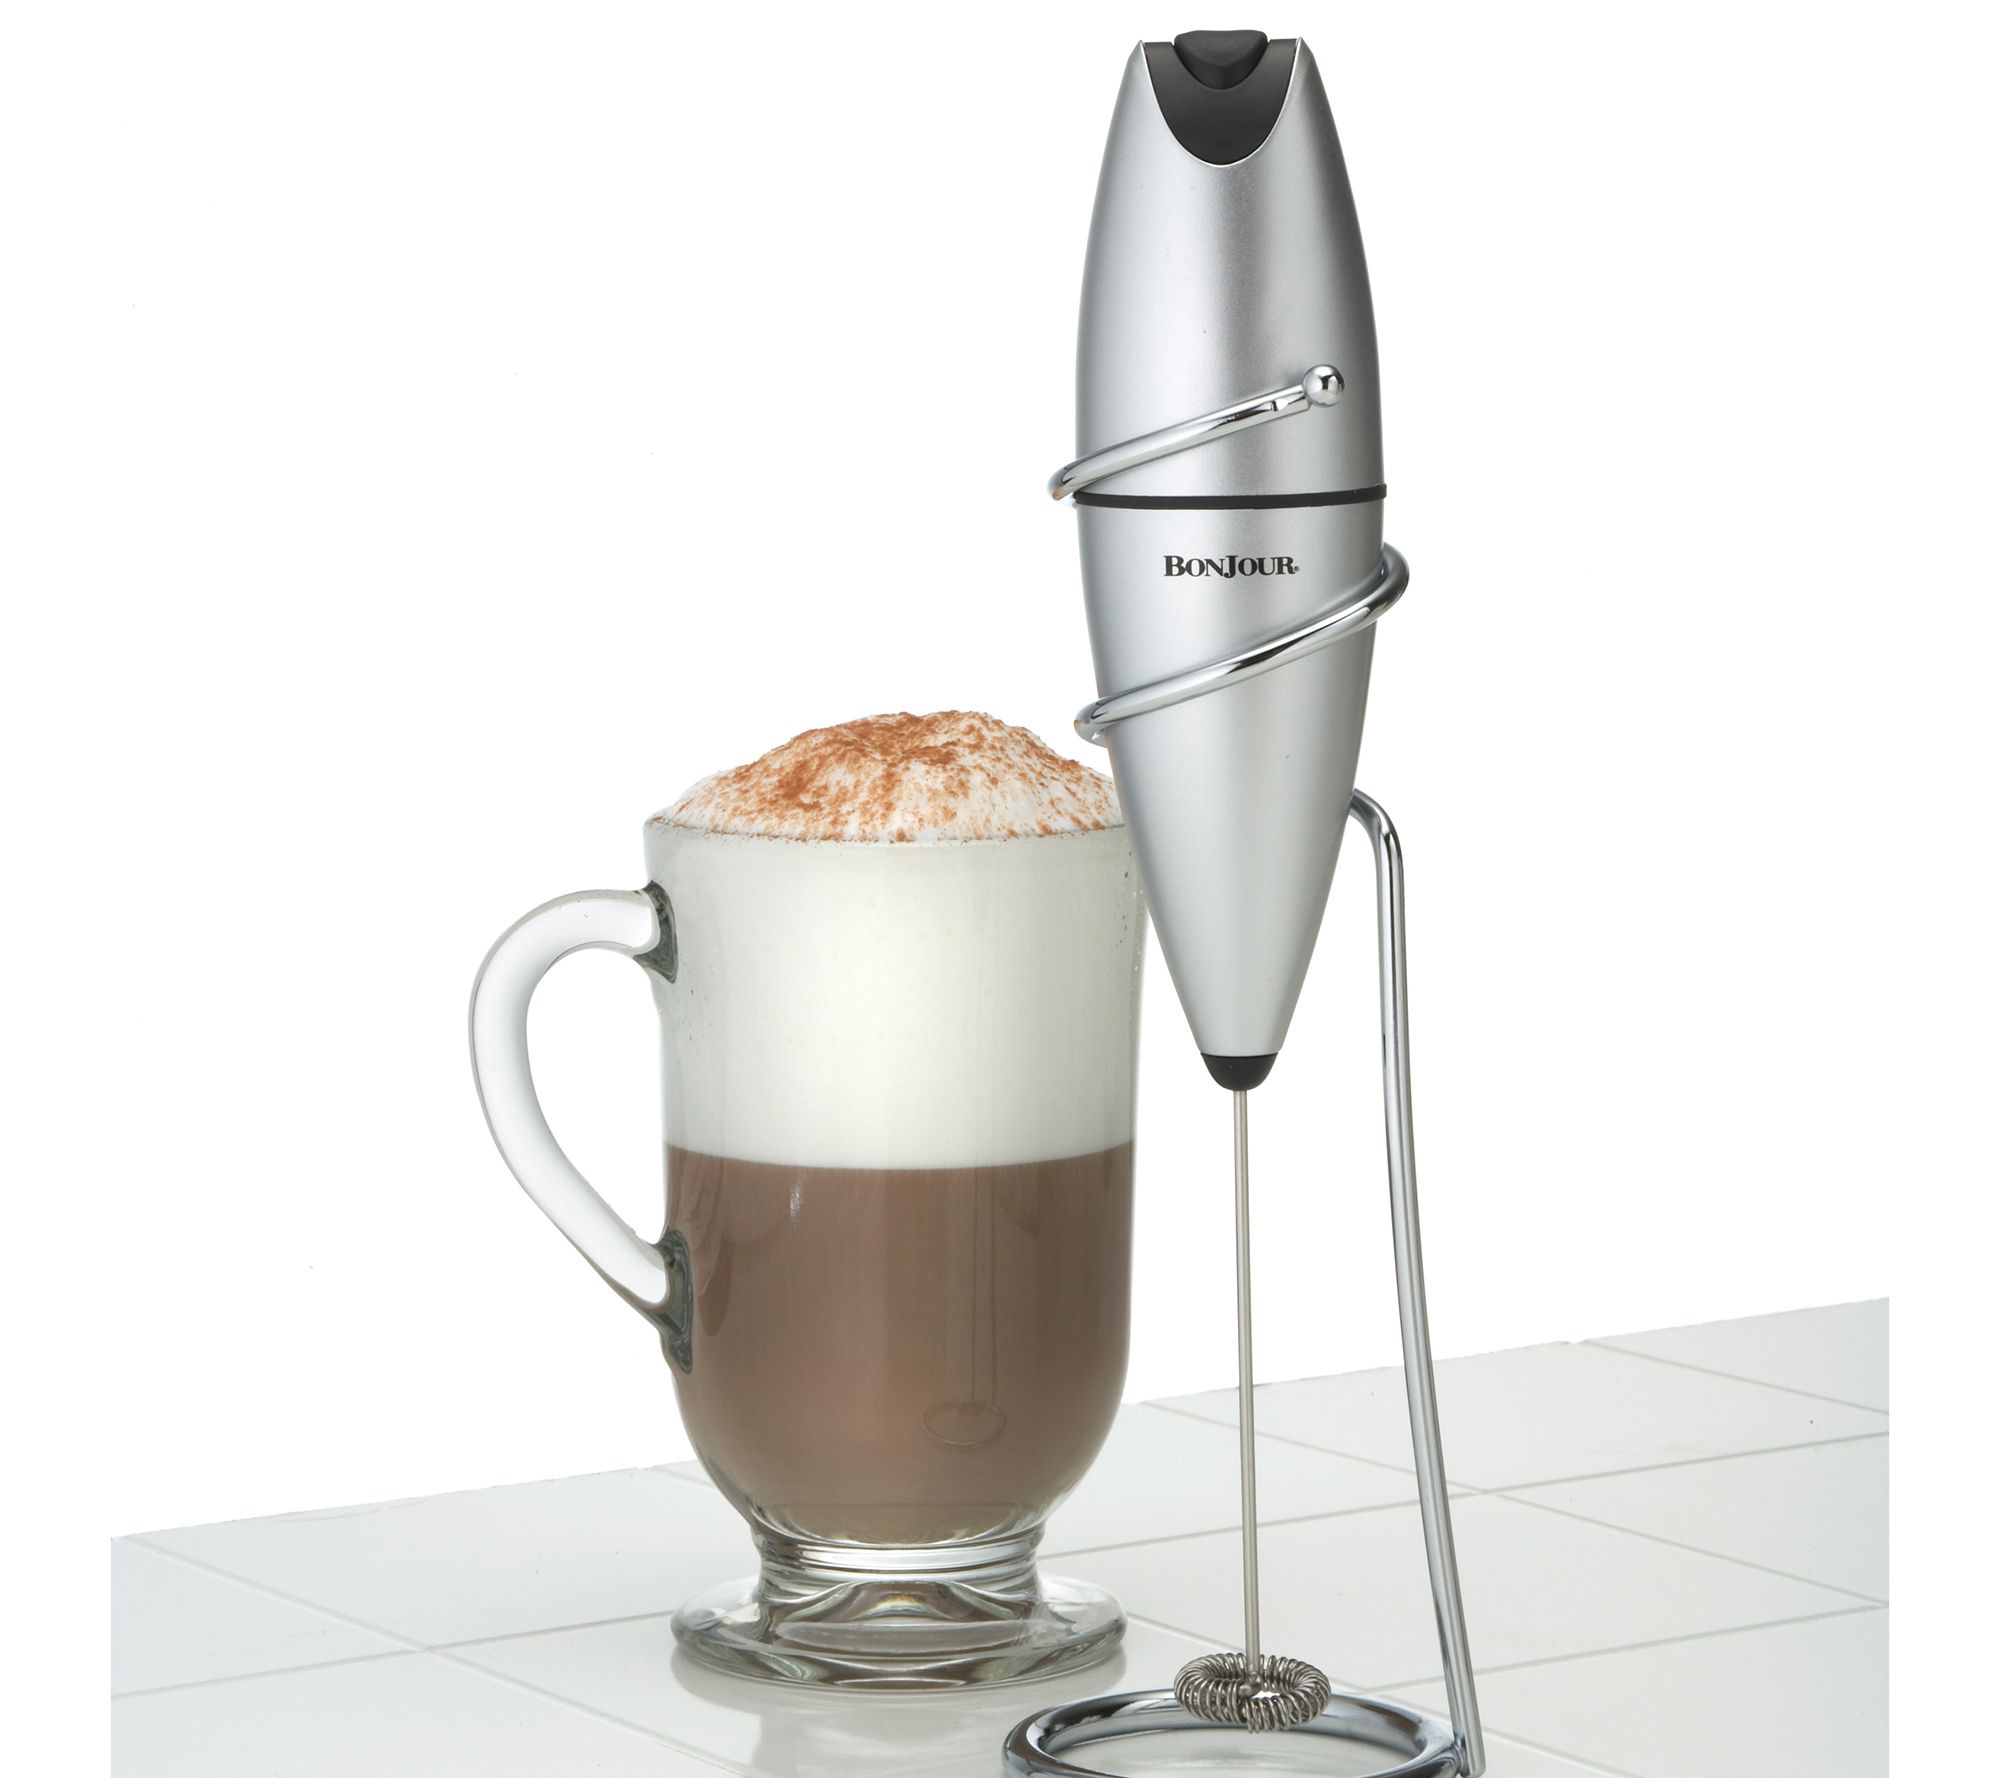 BonJour Stainless Hand-Held Beverage Whisk & Milk Frother